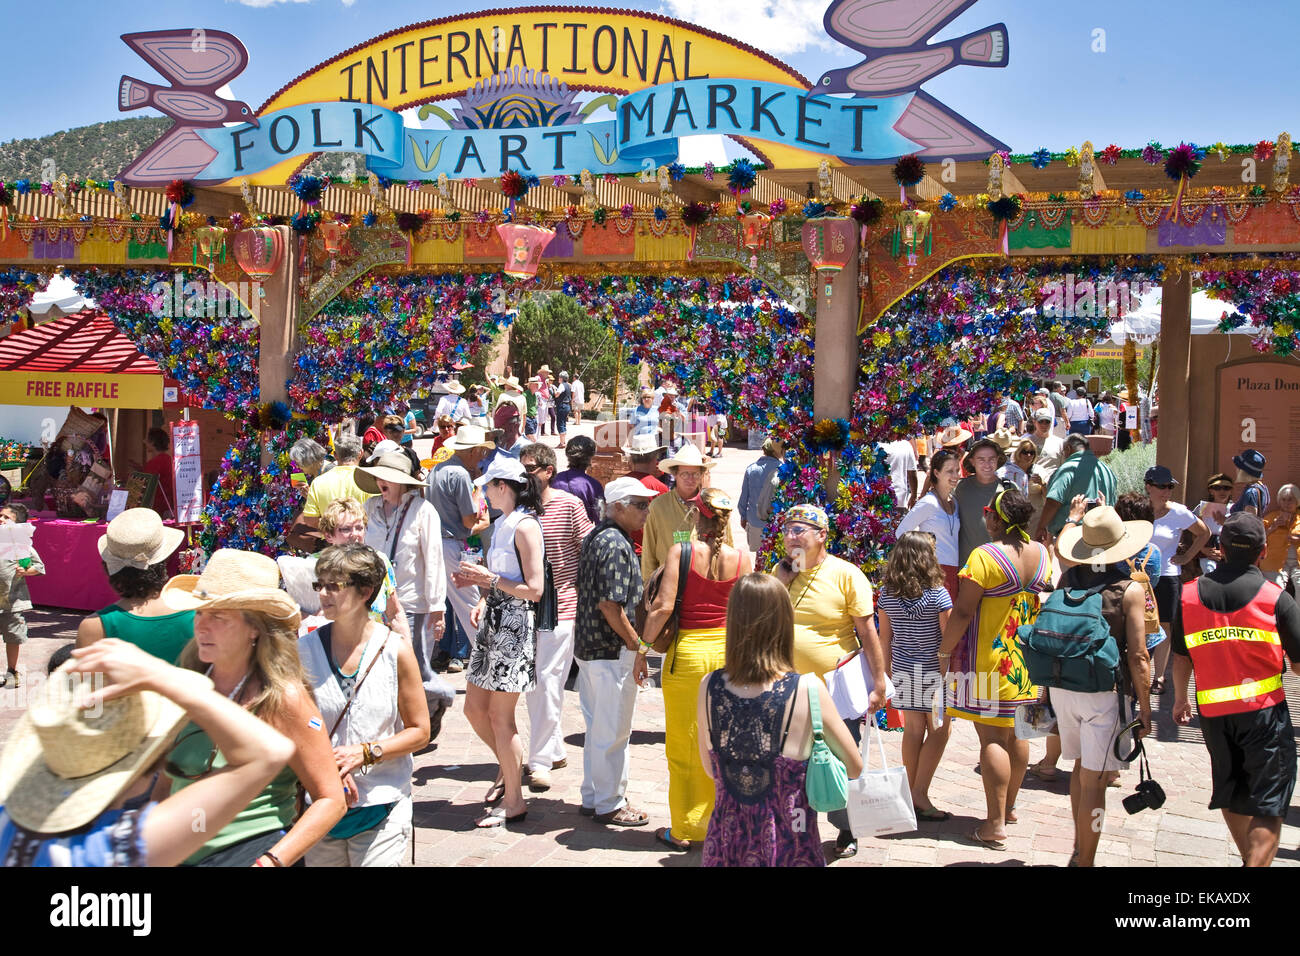 The main entrance to the Santa Fe International Folk Art Market held each July is a colorful and busy spot. Stock Photo